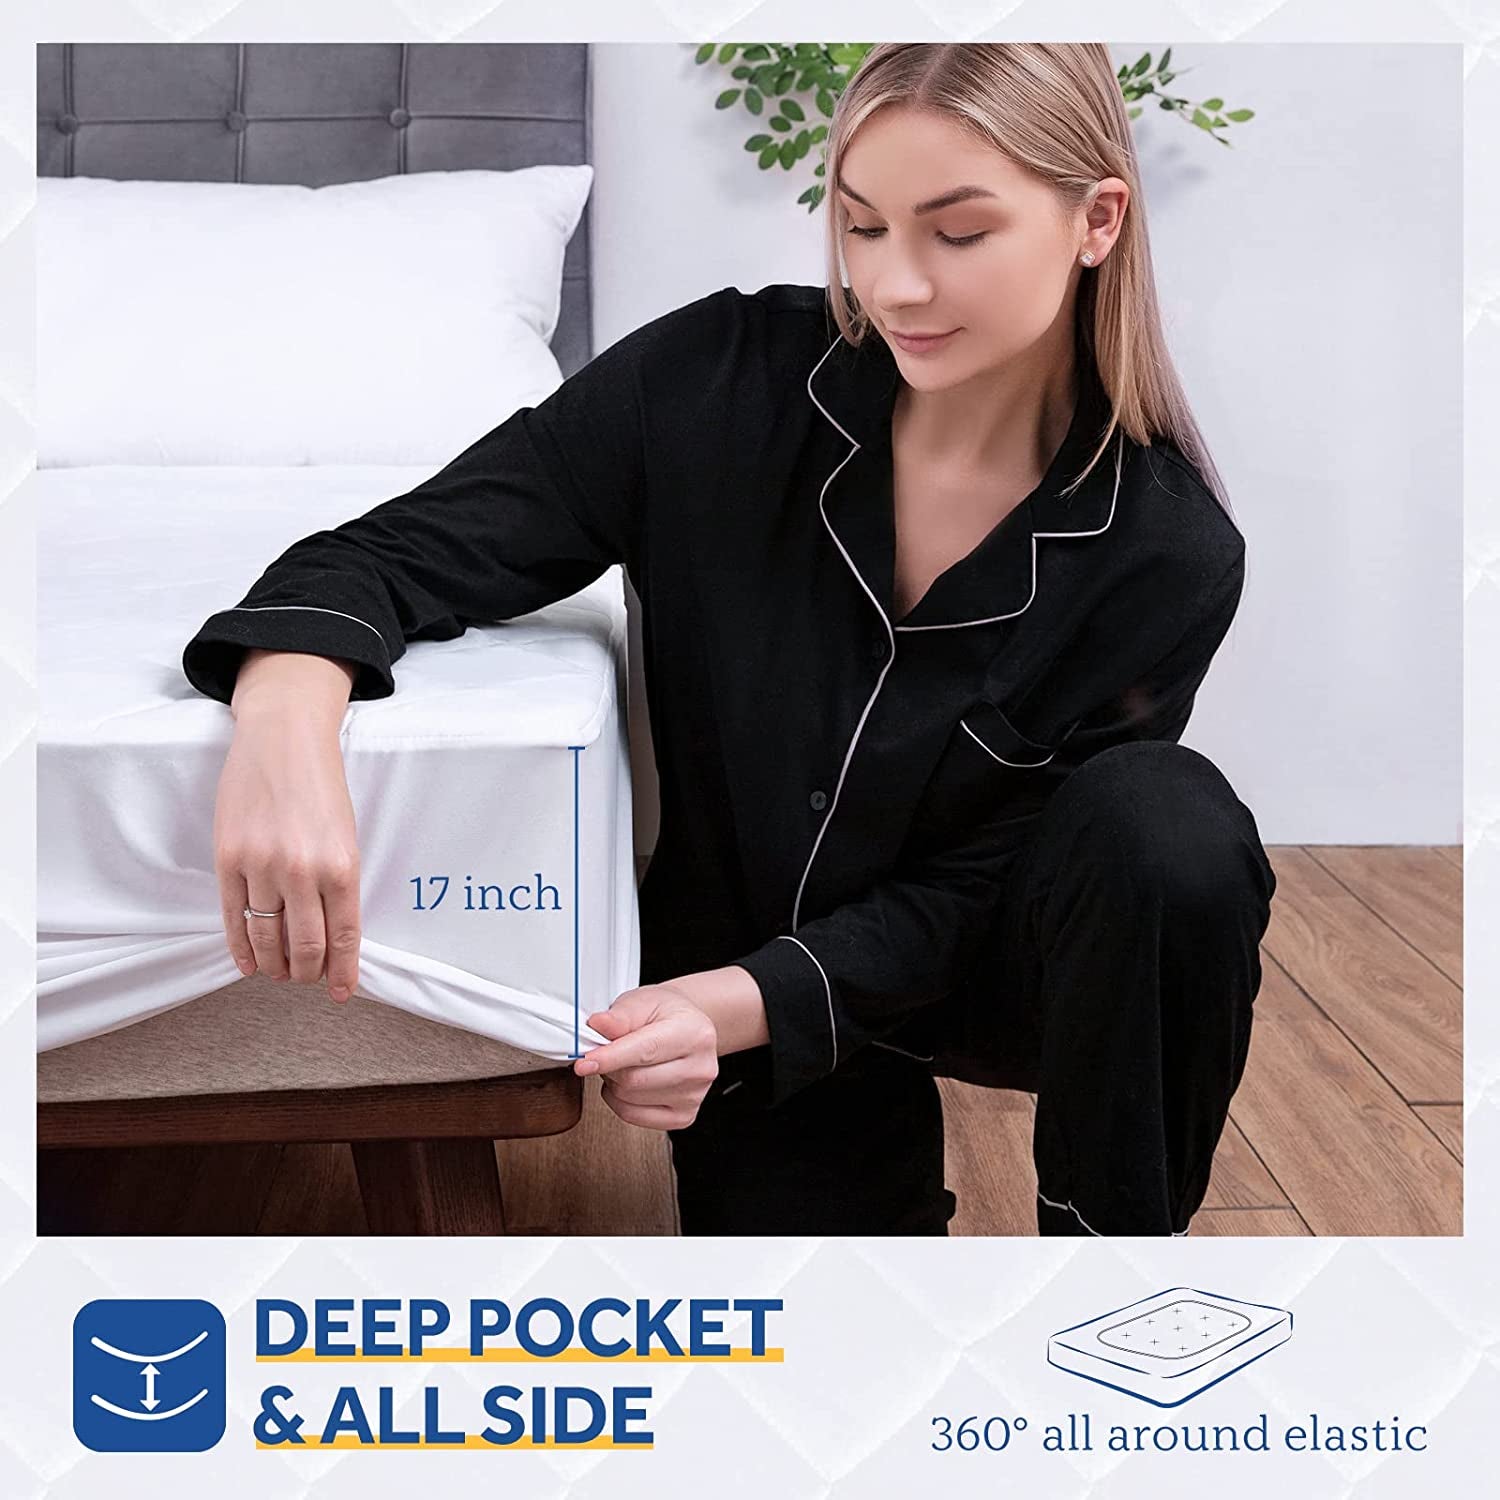 Sealy Heated Mattress Pad Fit up to 17" Deep Pocket